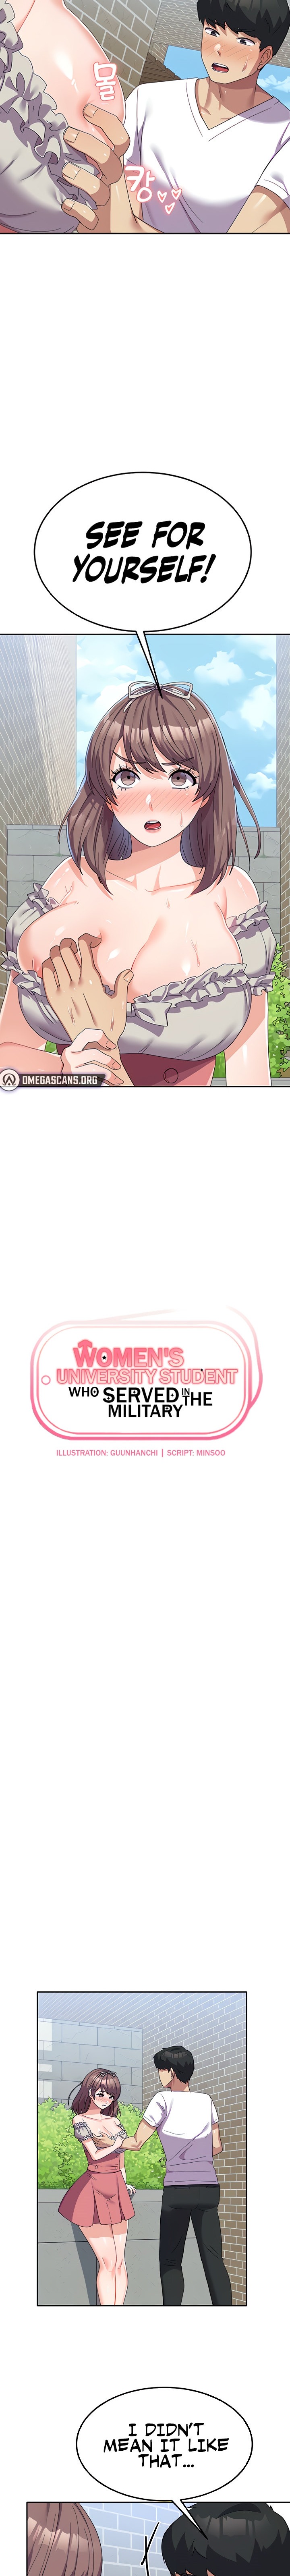 Women’s University Student who Served in the Military Chapter 25 - Page 2